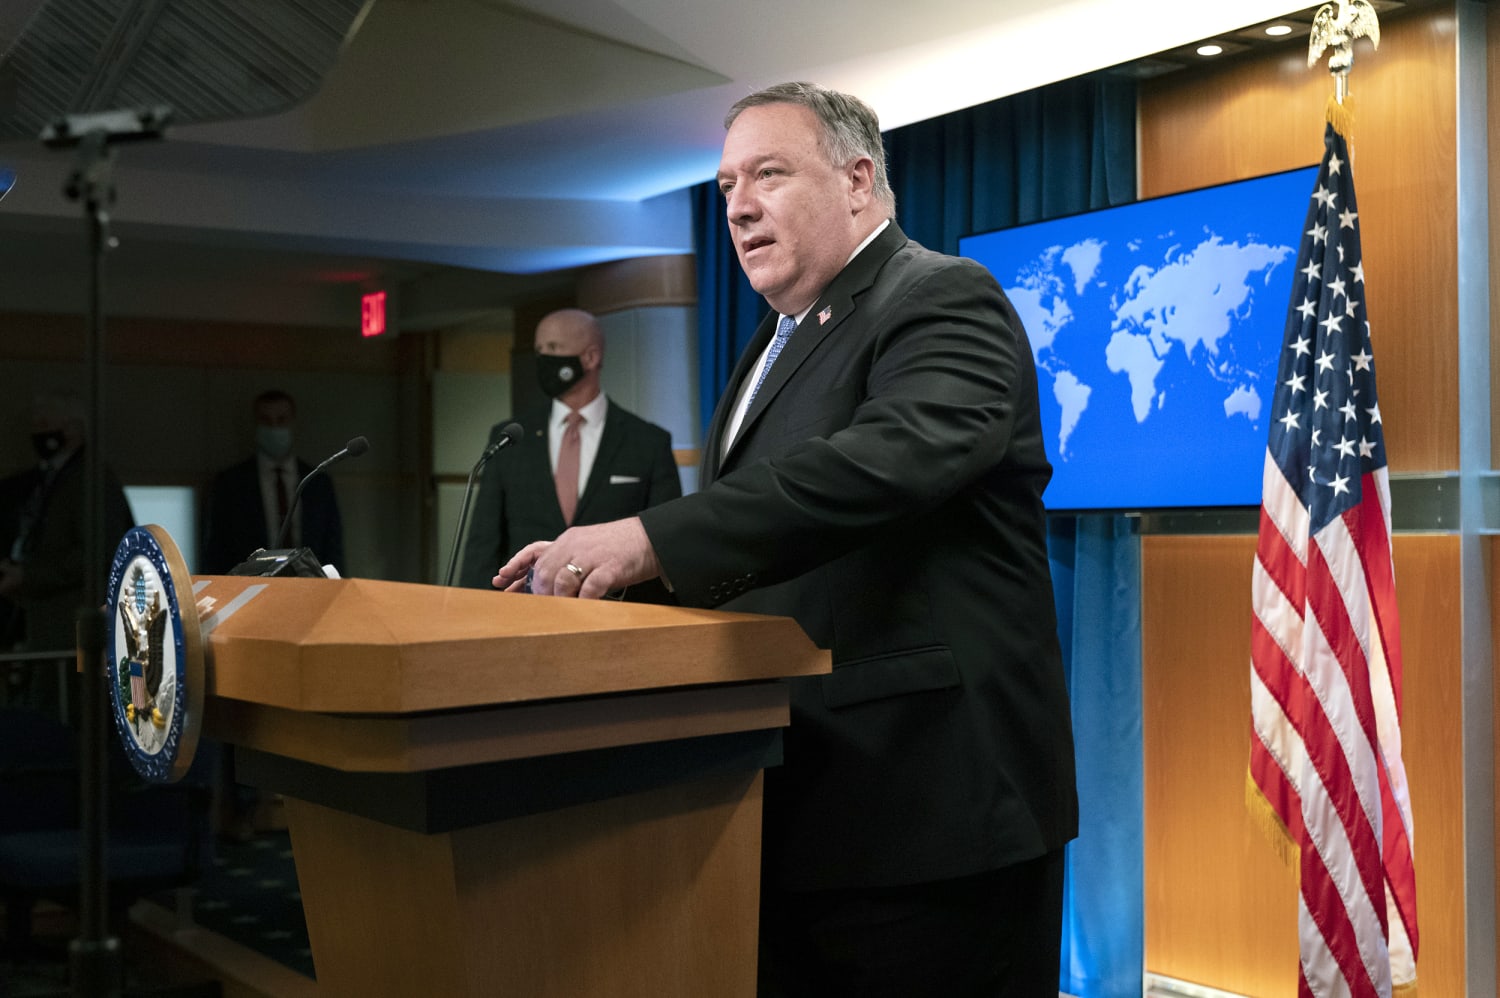 There will be a smooth transition to a second Trump administration,' Pompeo claims